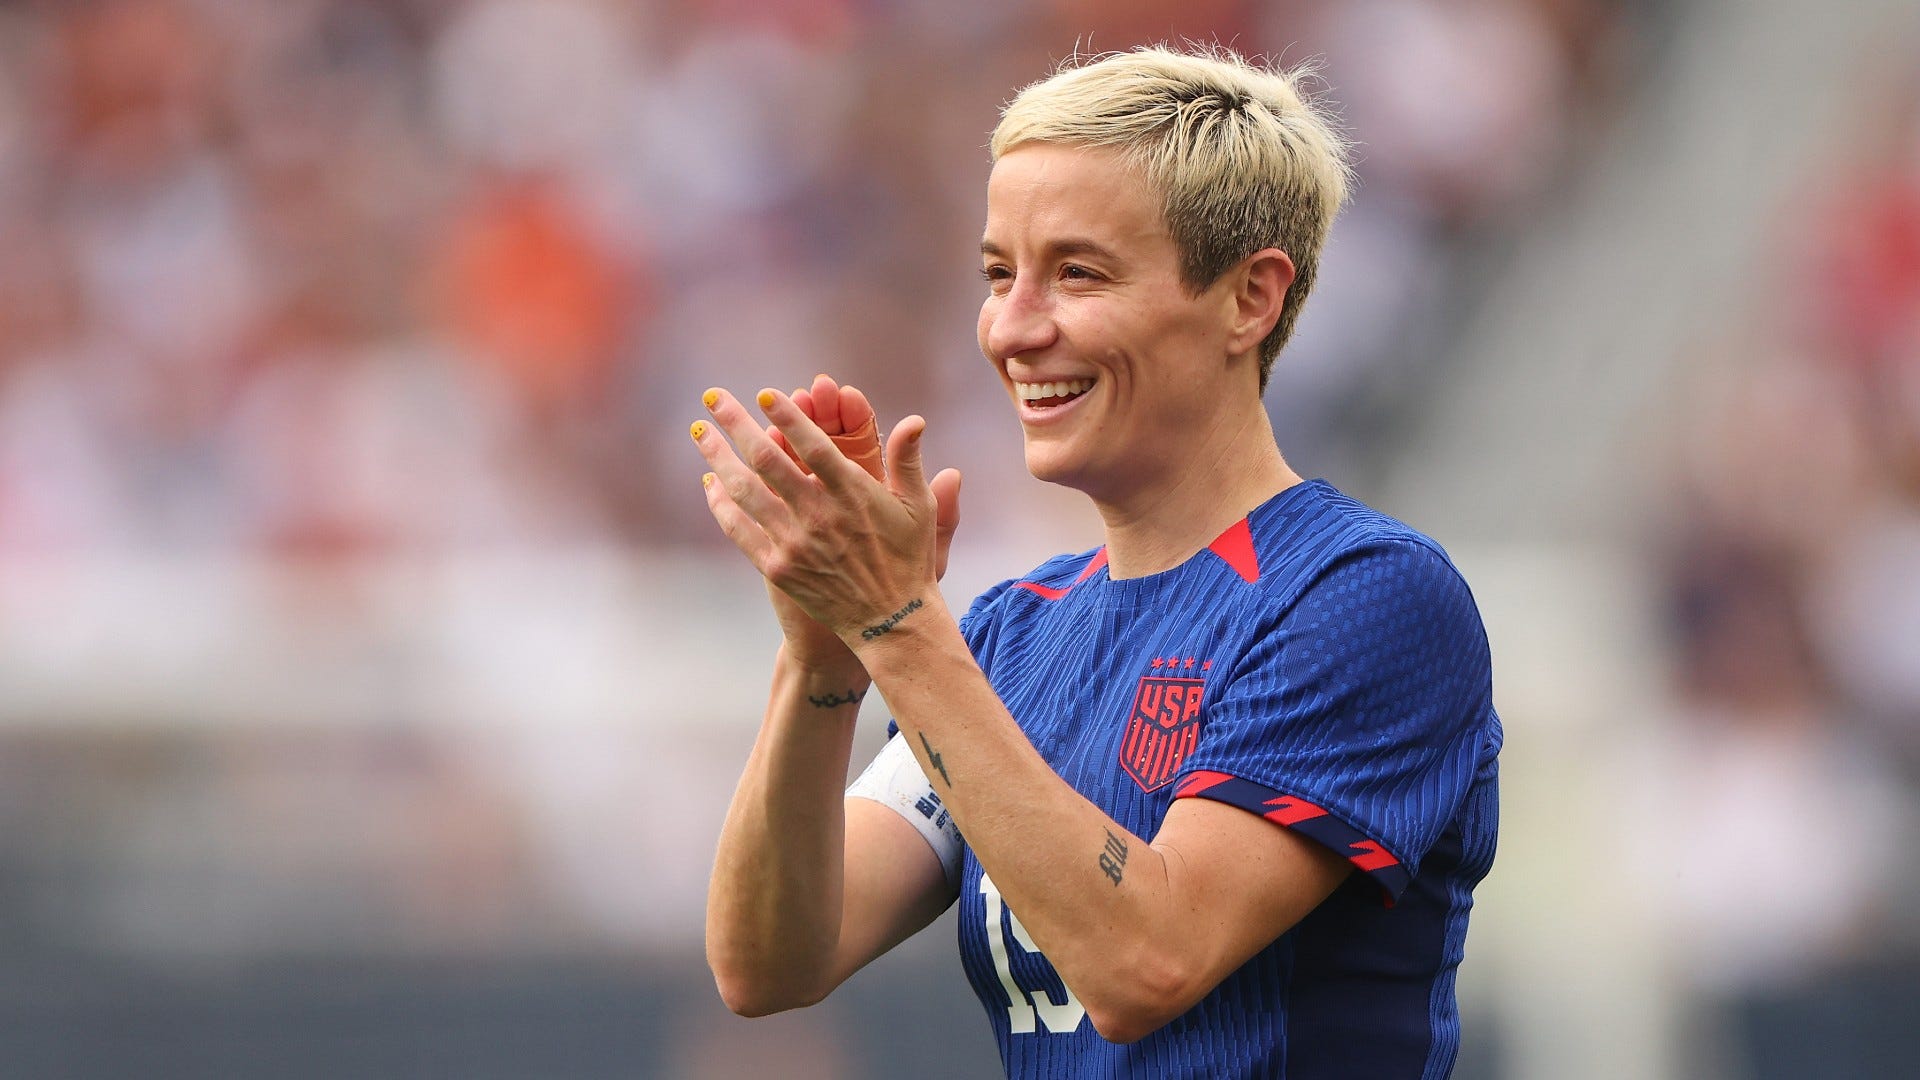 WATCH: Megan Rapinoe does iconic celebration one last time after teeing up Emily Sonnett in USWNT farewell